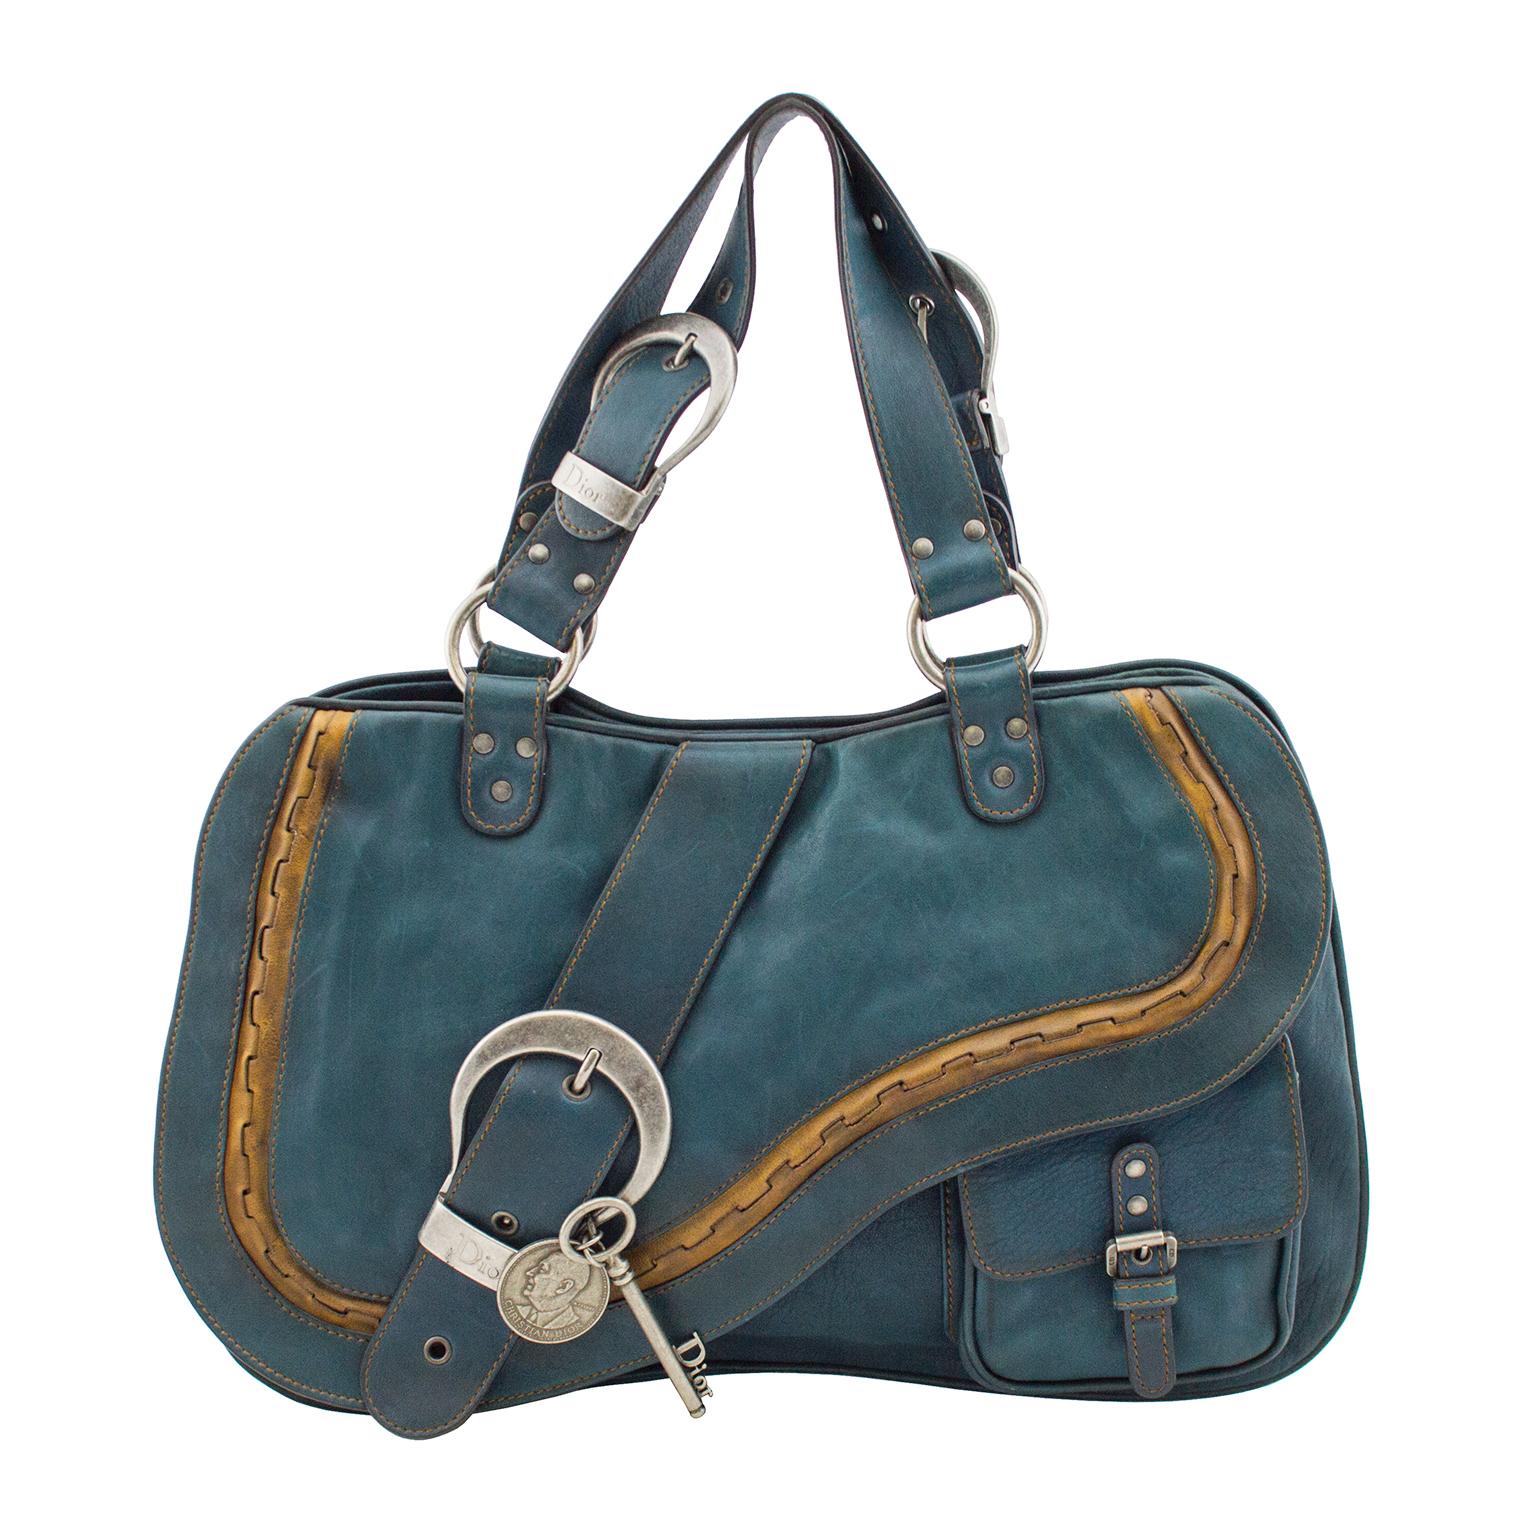 S/S 2006 Dior Double Gaucho Teal Blue Leather Saddle bag